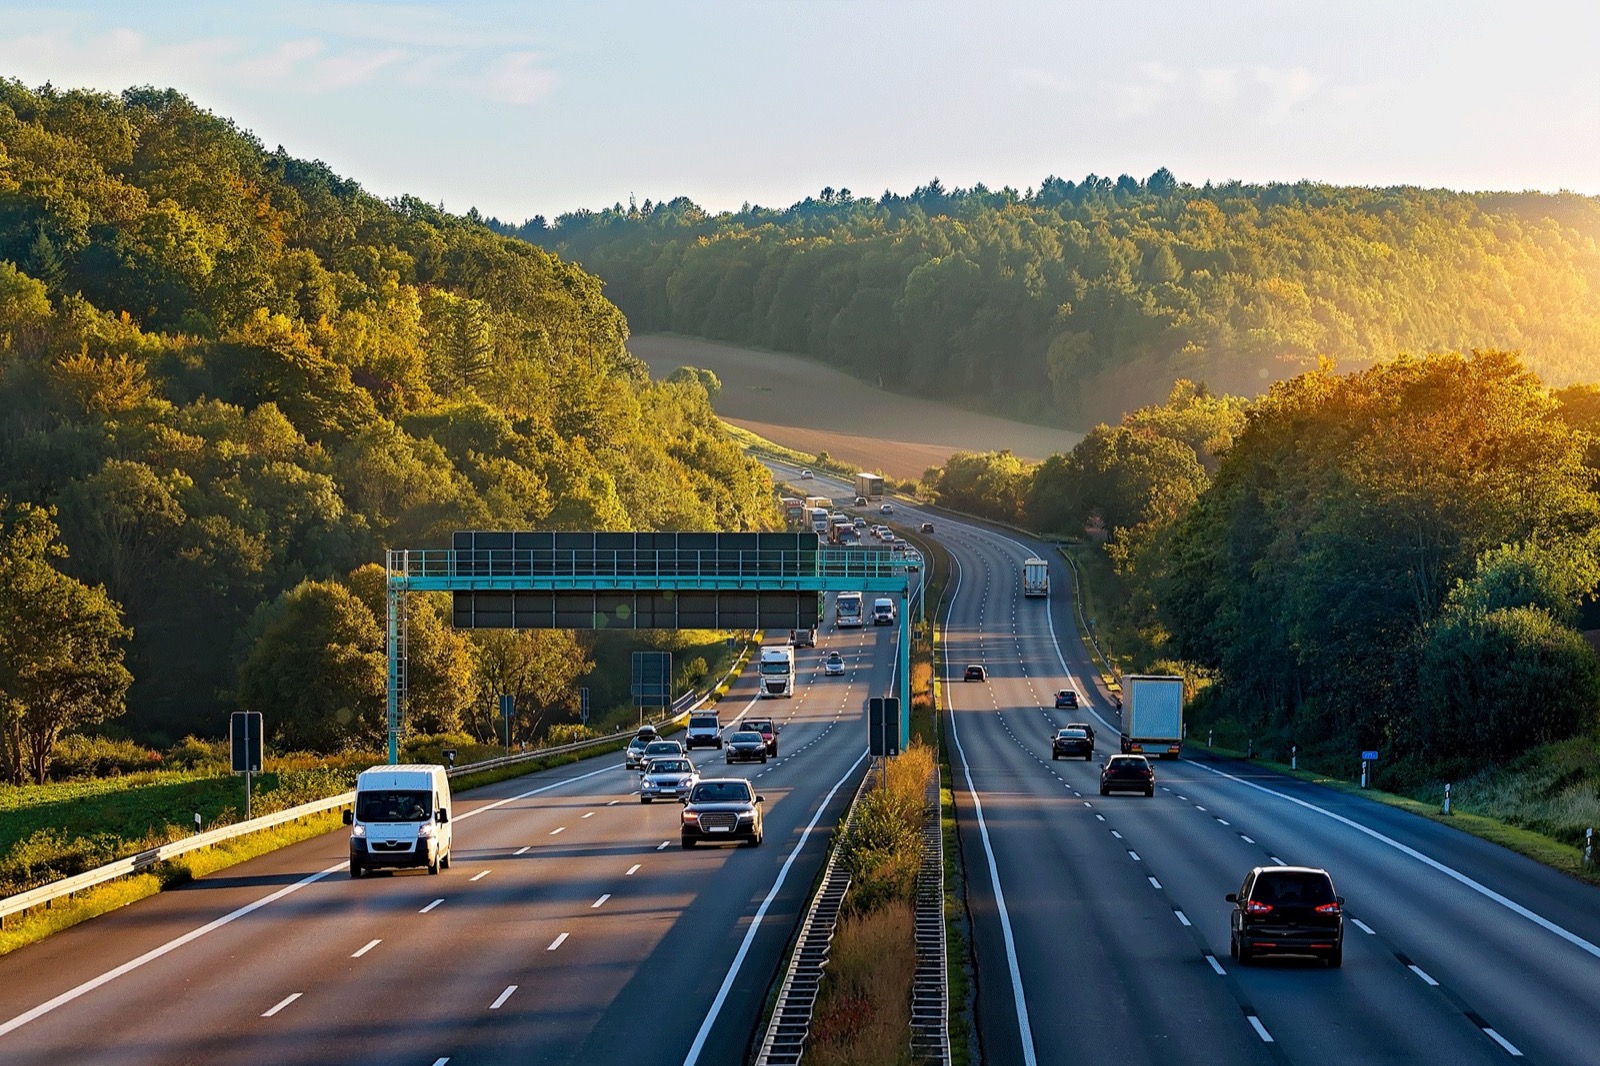 Do You Have the Smarts to Get an ‘A’ On This Geography Test? Autobahn Highway Road, Germany